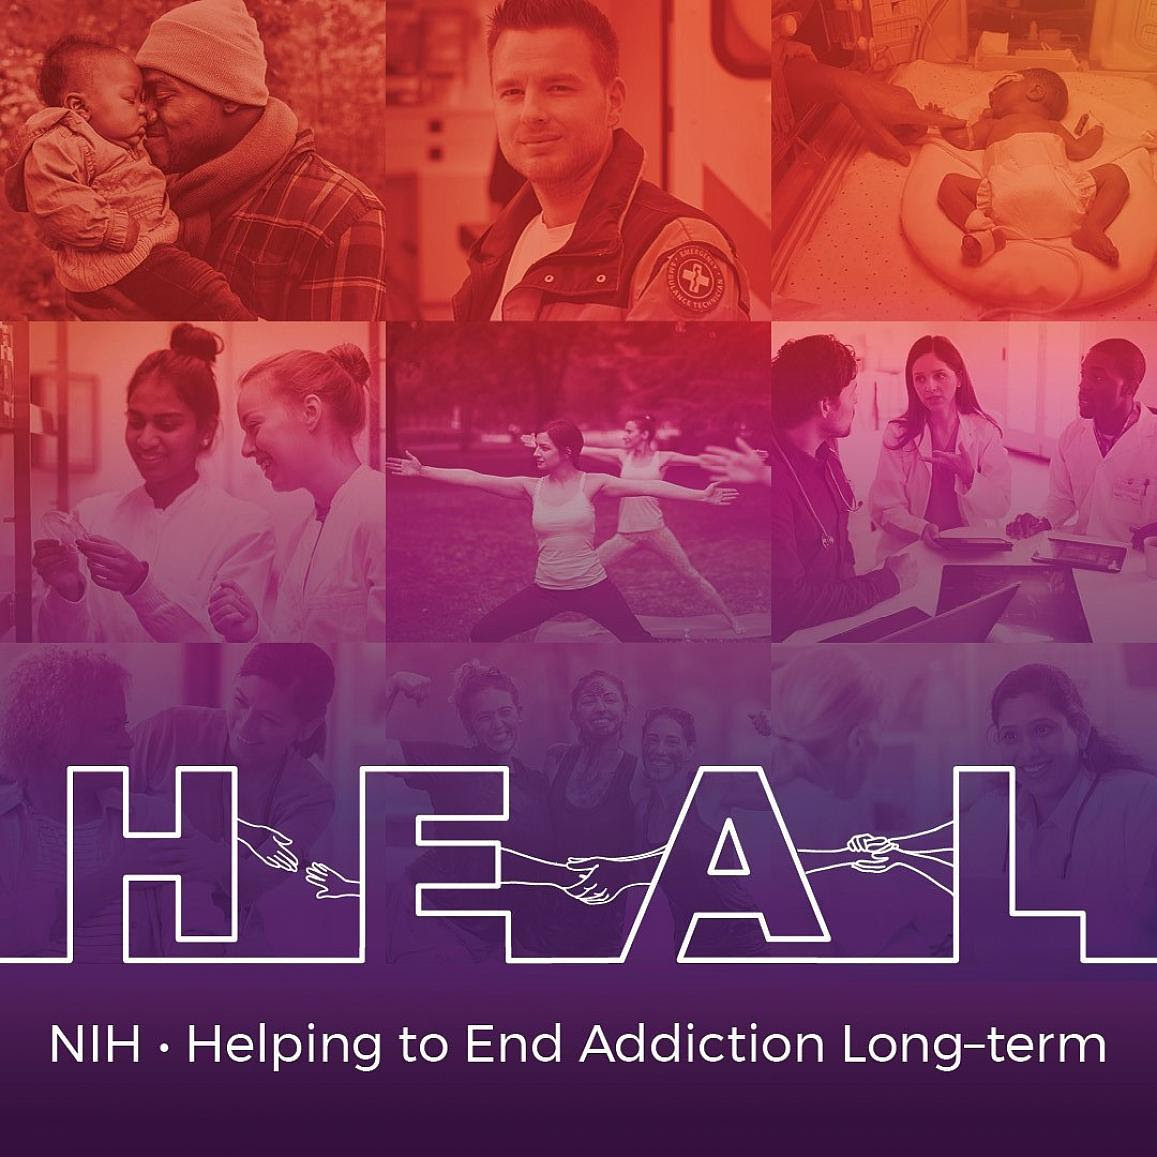 NIH HEAL (Helping to End Addiction Long-term) Initiative